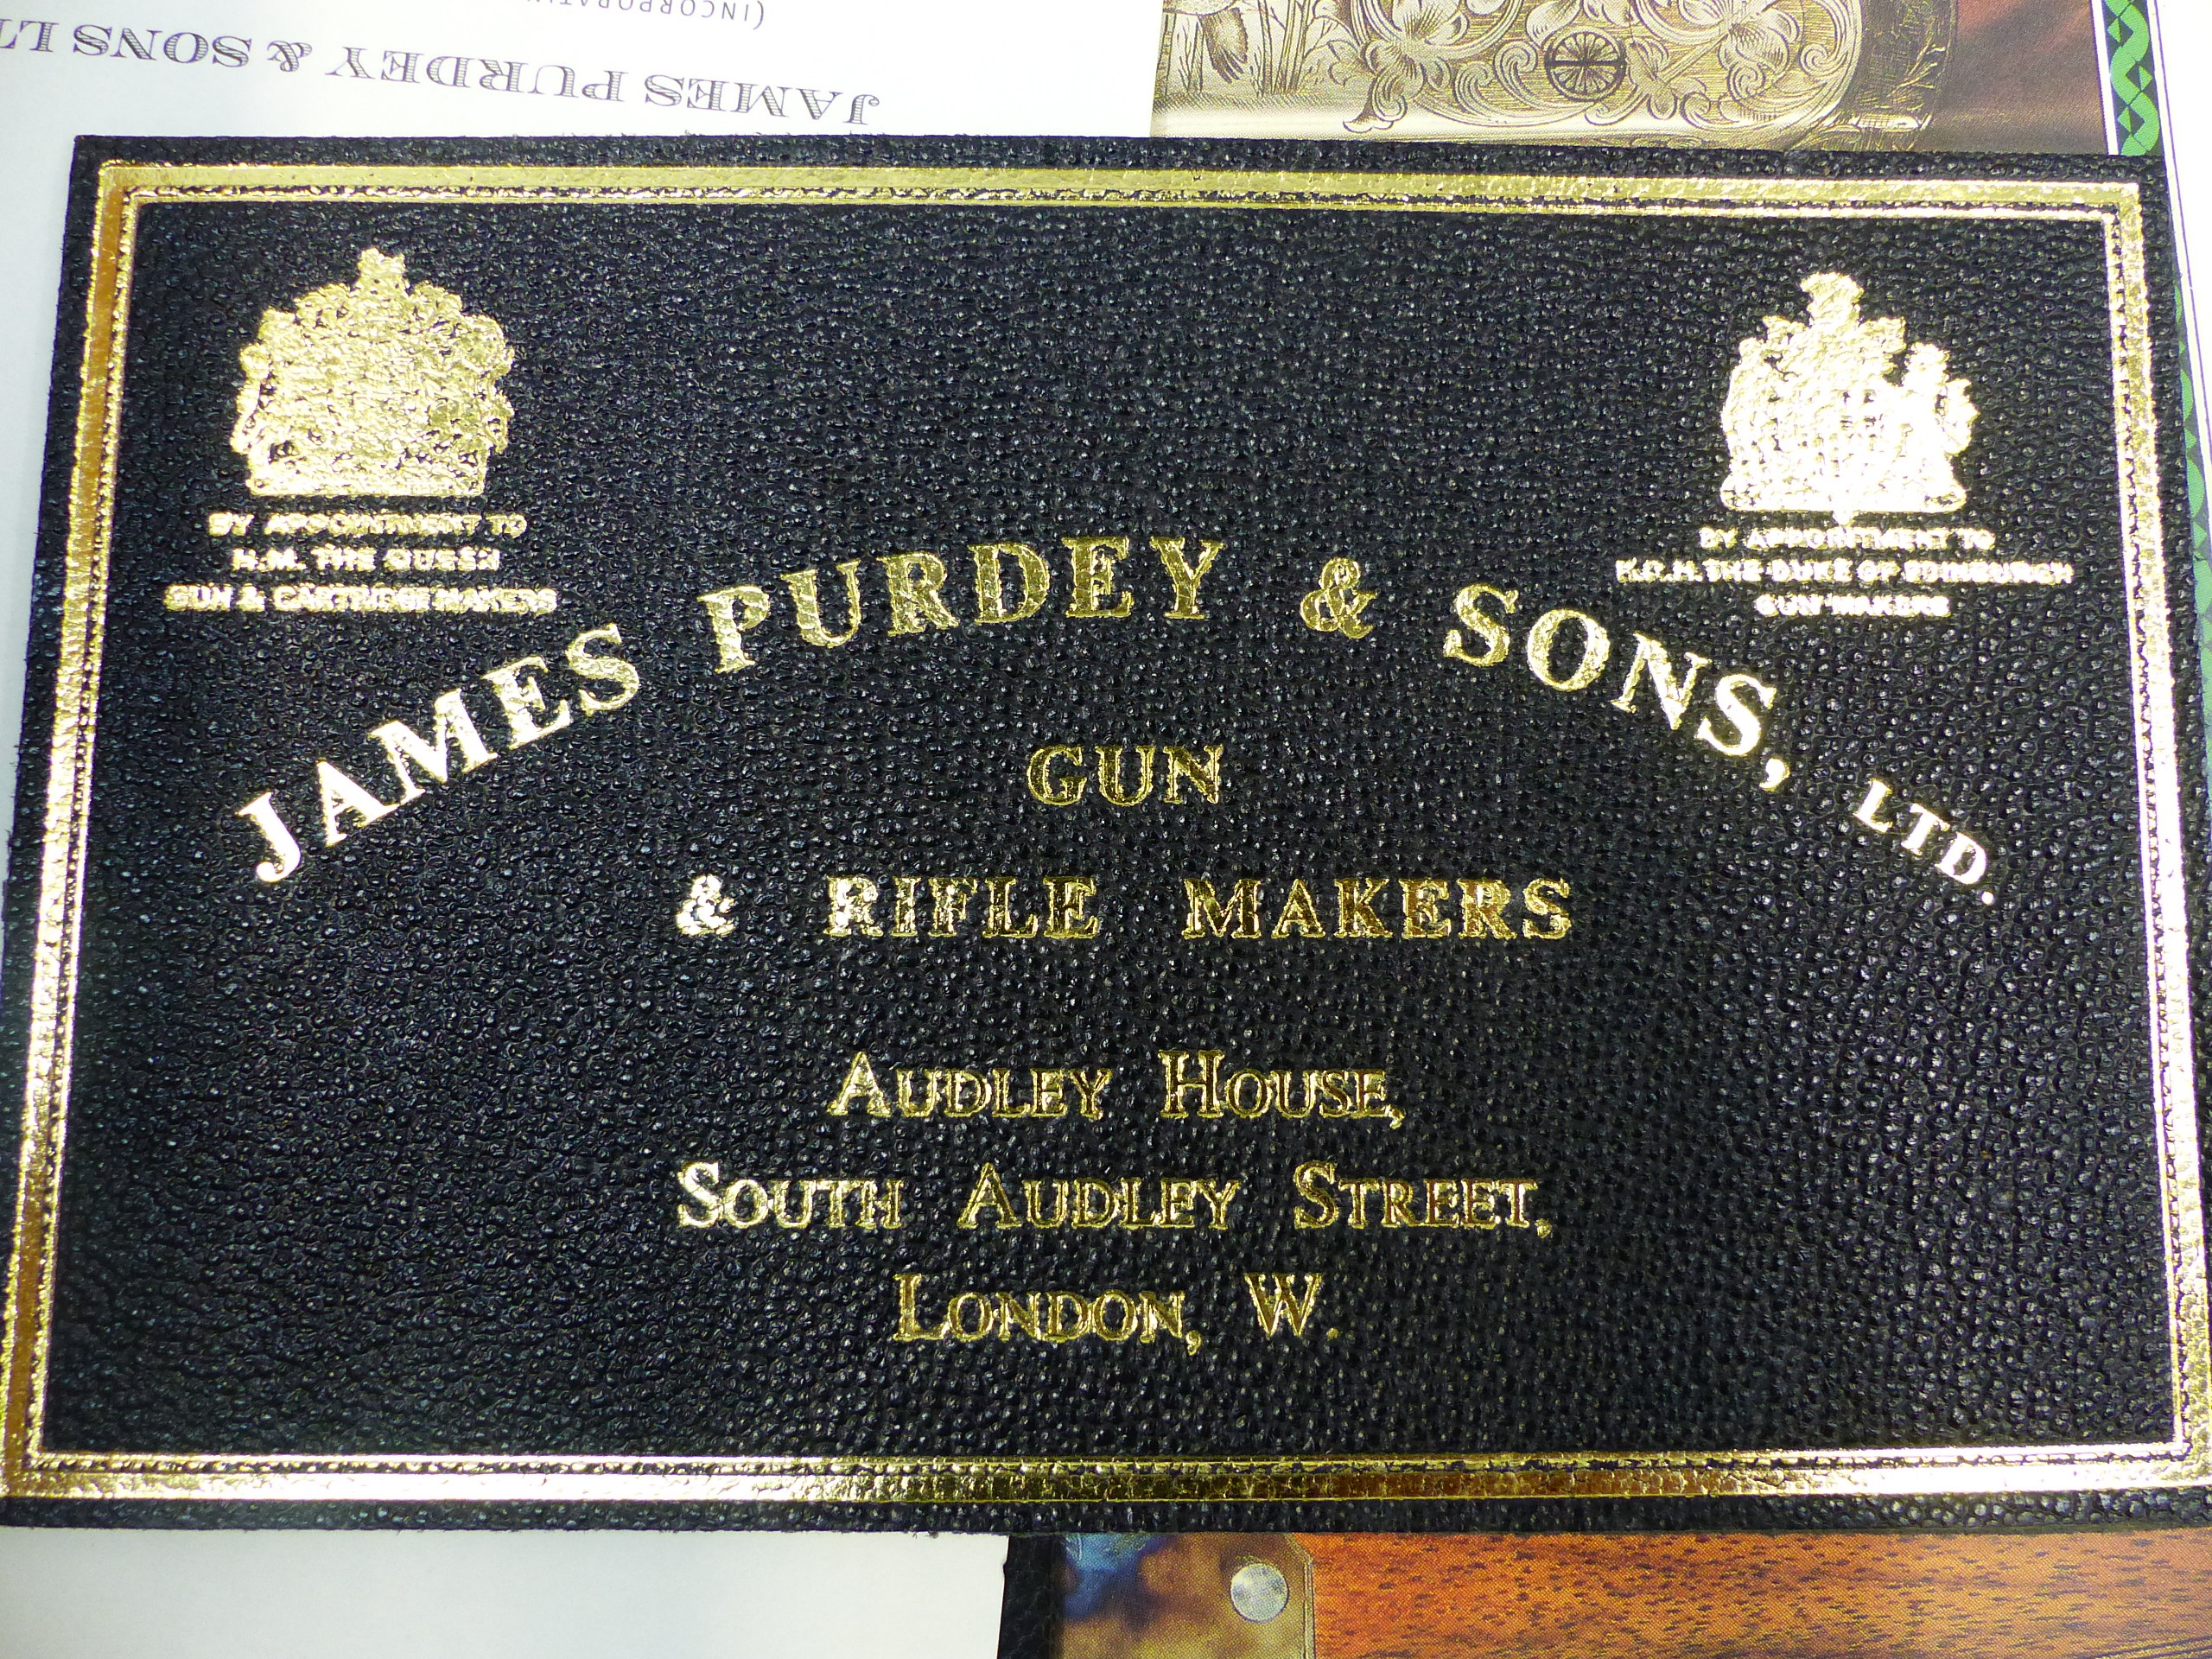 TWO UNUSED JAMES PURDEY AND SONS LEATHER GUN CASE LABELS, A SET OF PURDEY PLACE MARKER CARDS AND A